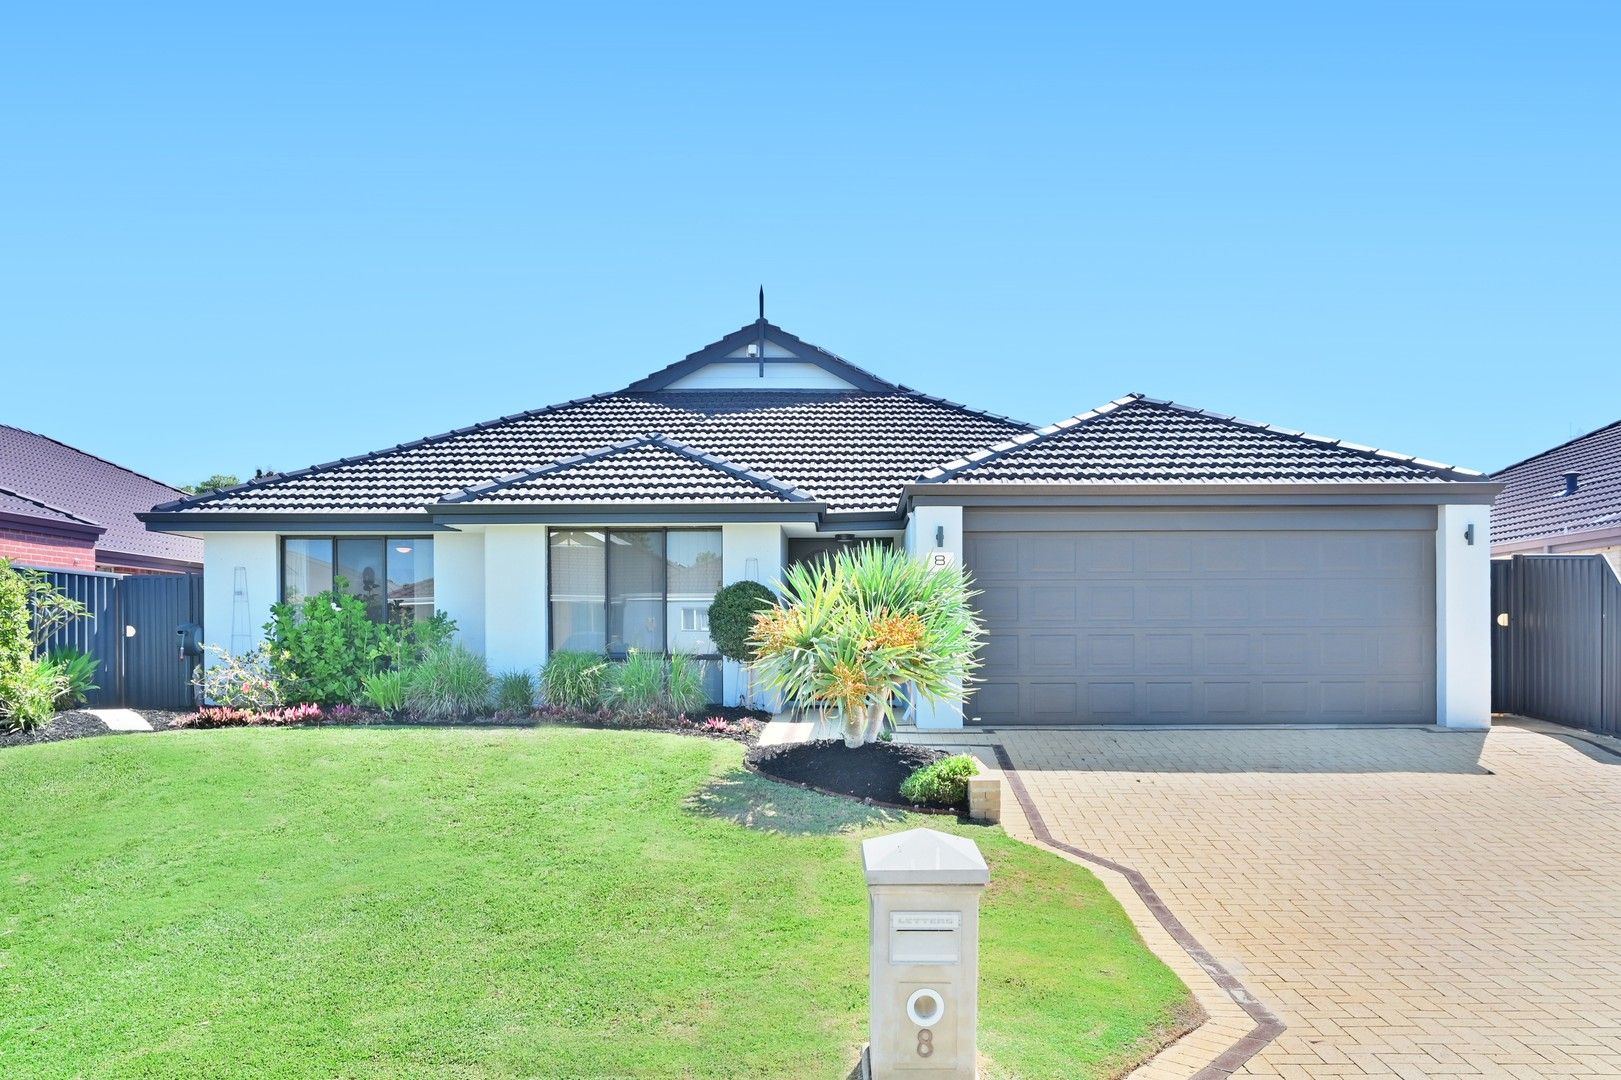 4 bedrooms House in 8 Polo Way BUTLER WA, 6036